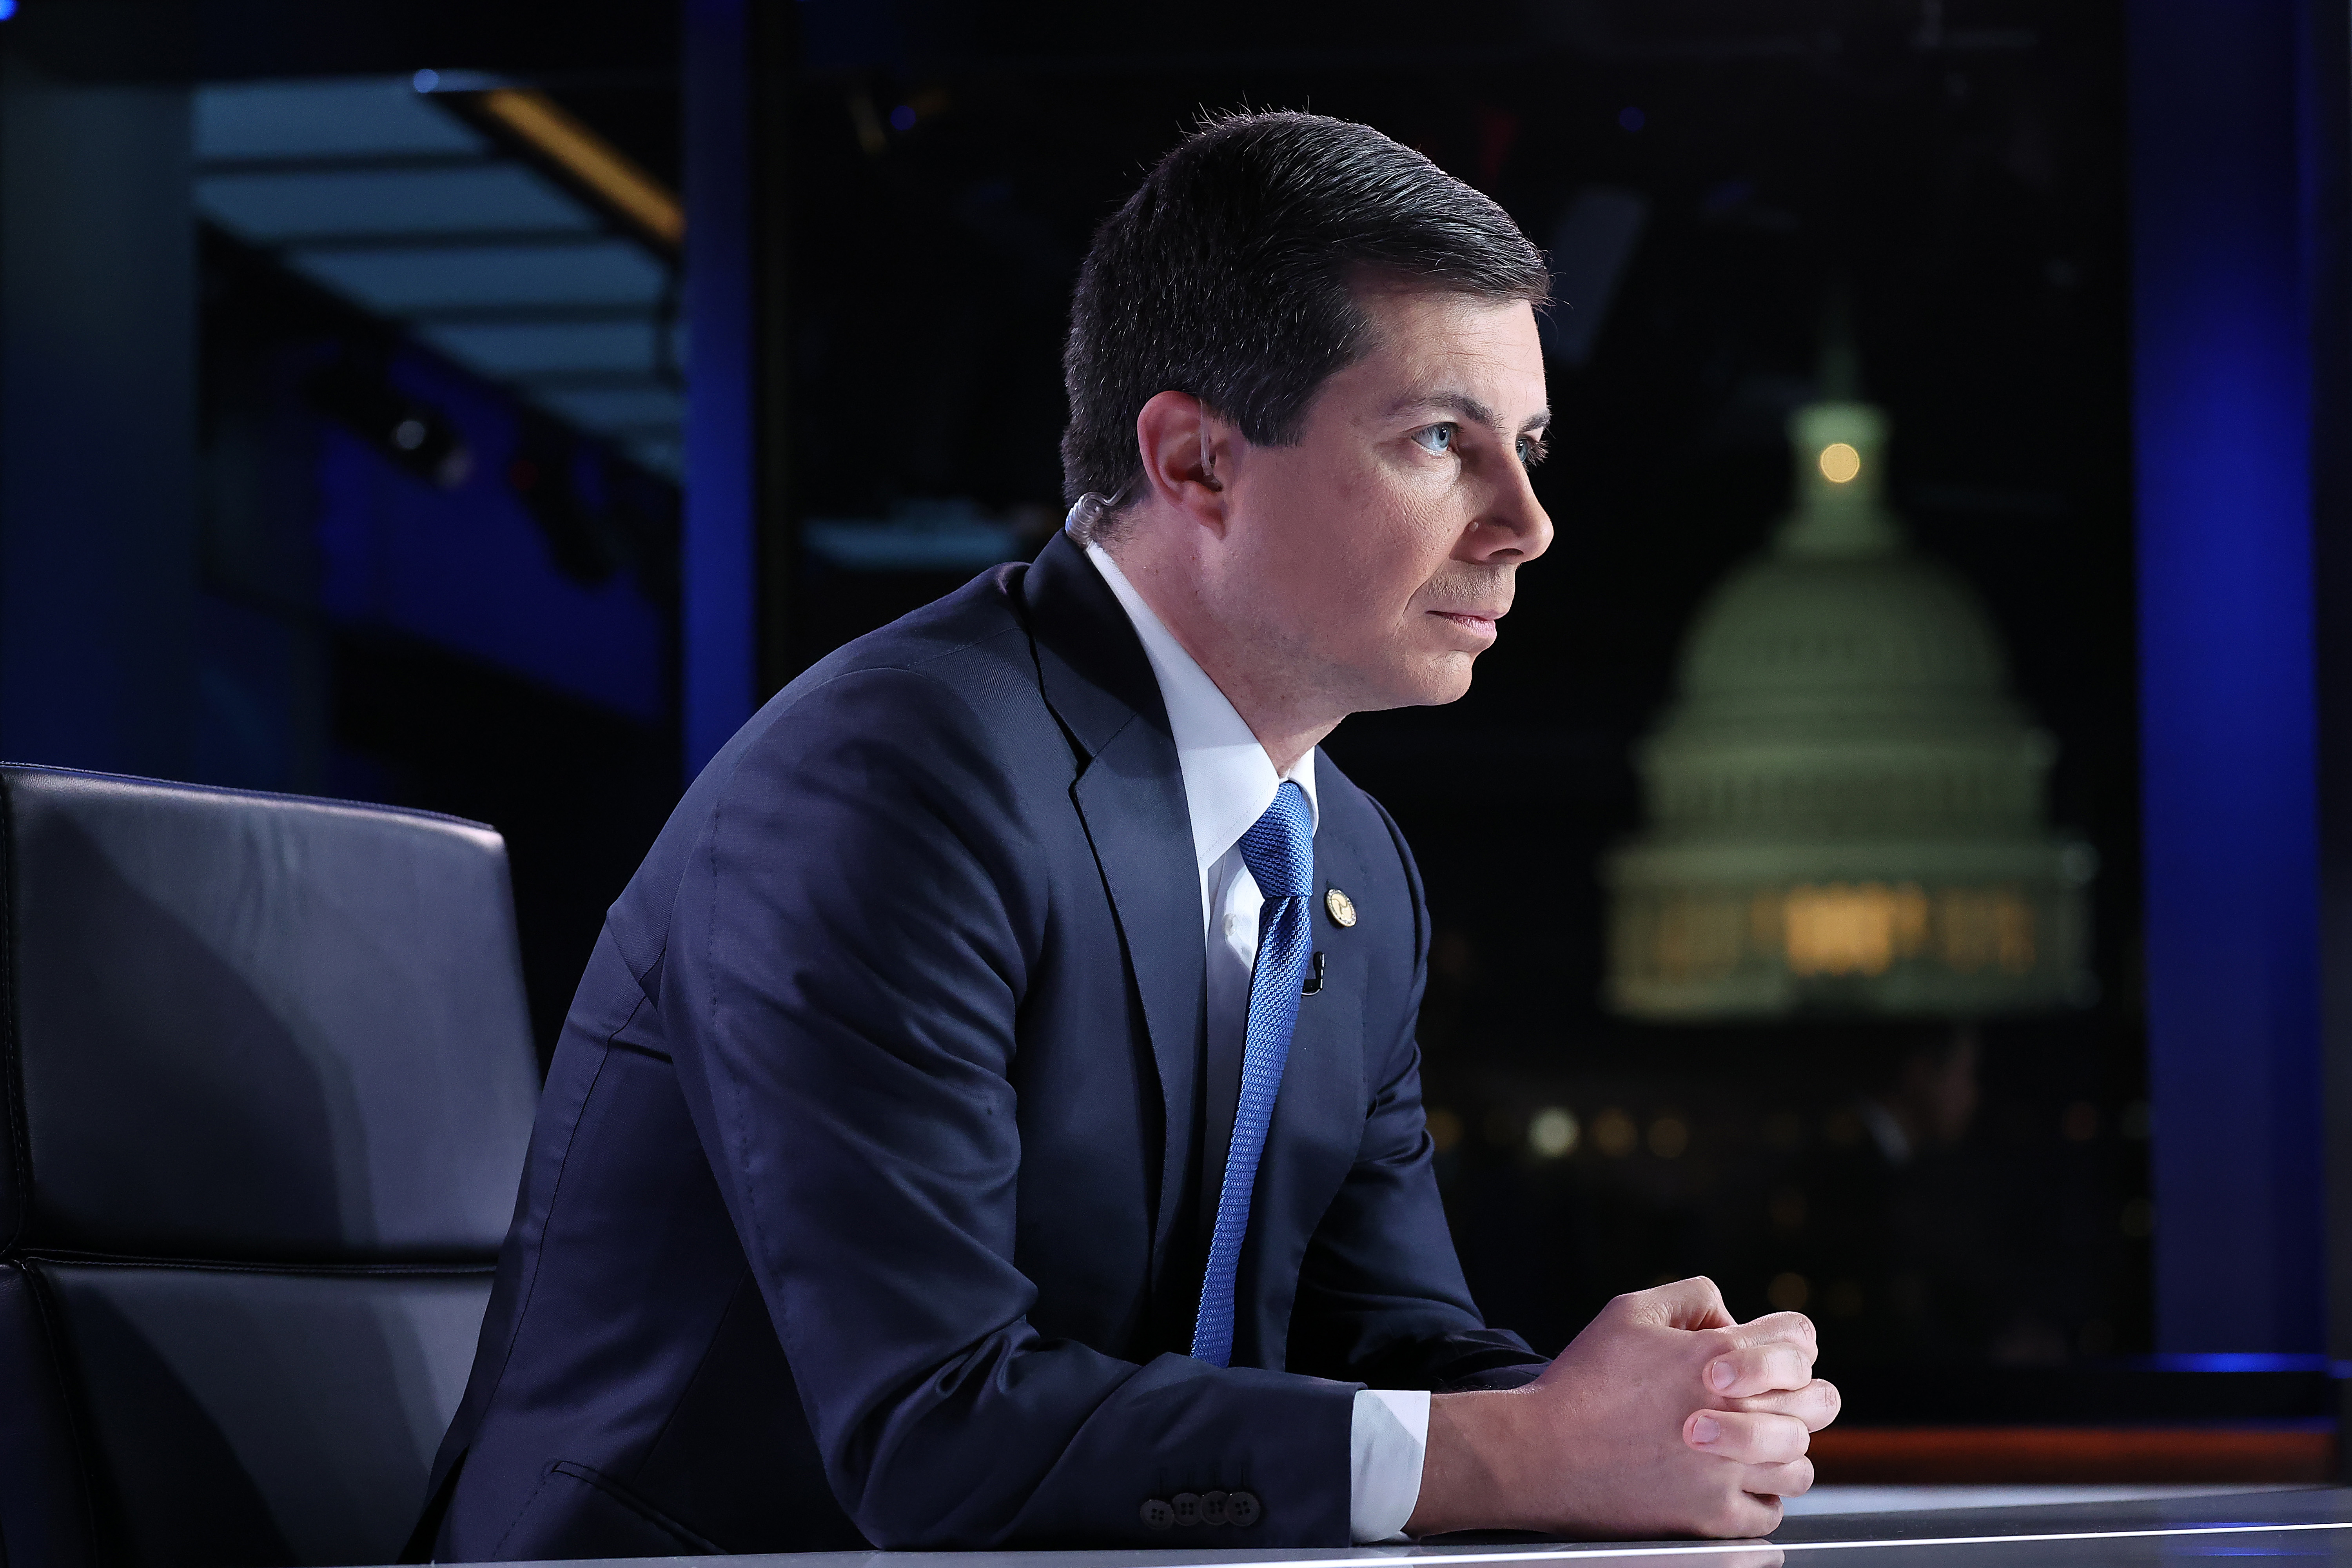 Secretary of Transportation Pete Buttigieg, in a blue suit and tie, listens with his hands clasped in front of him during a TV appearance.